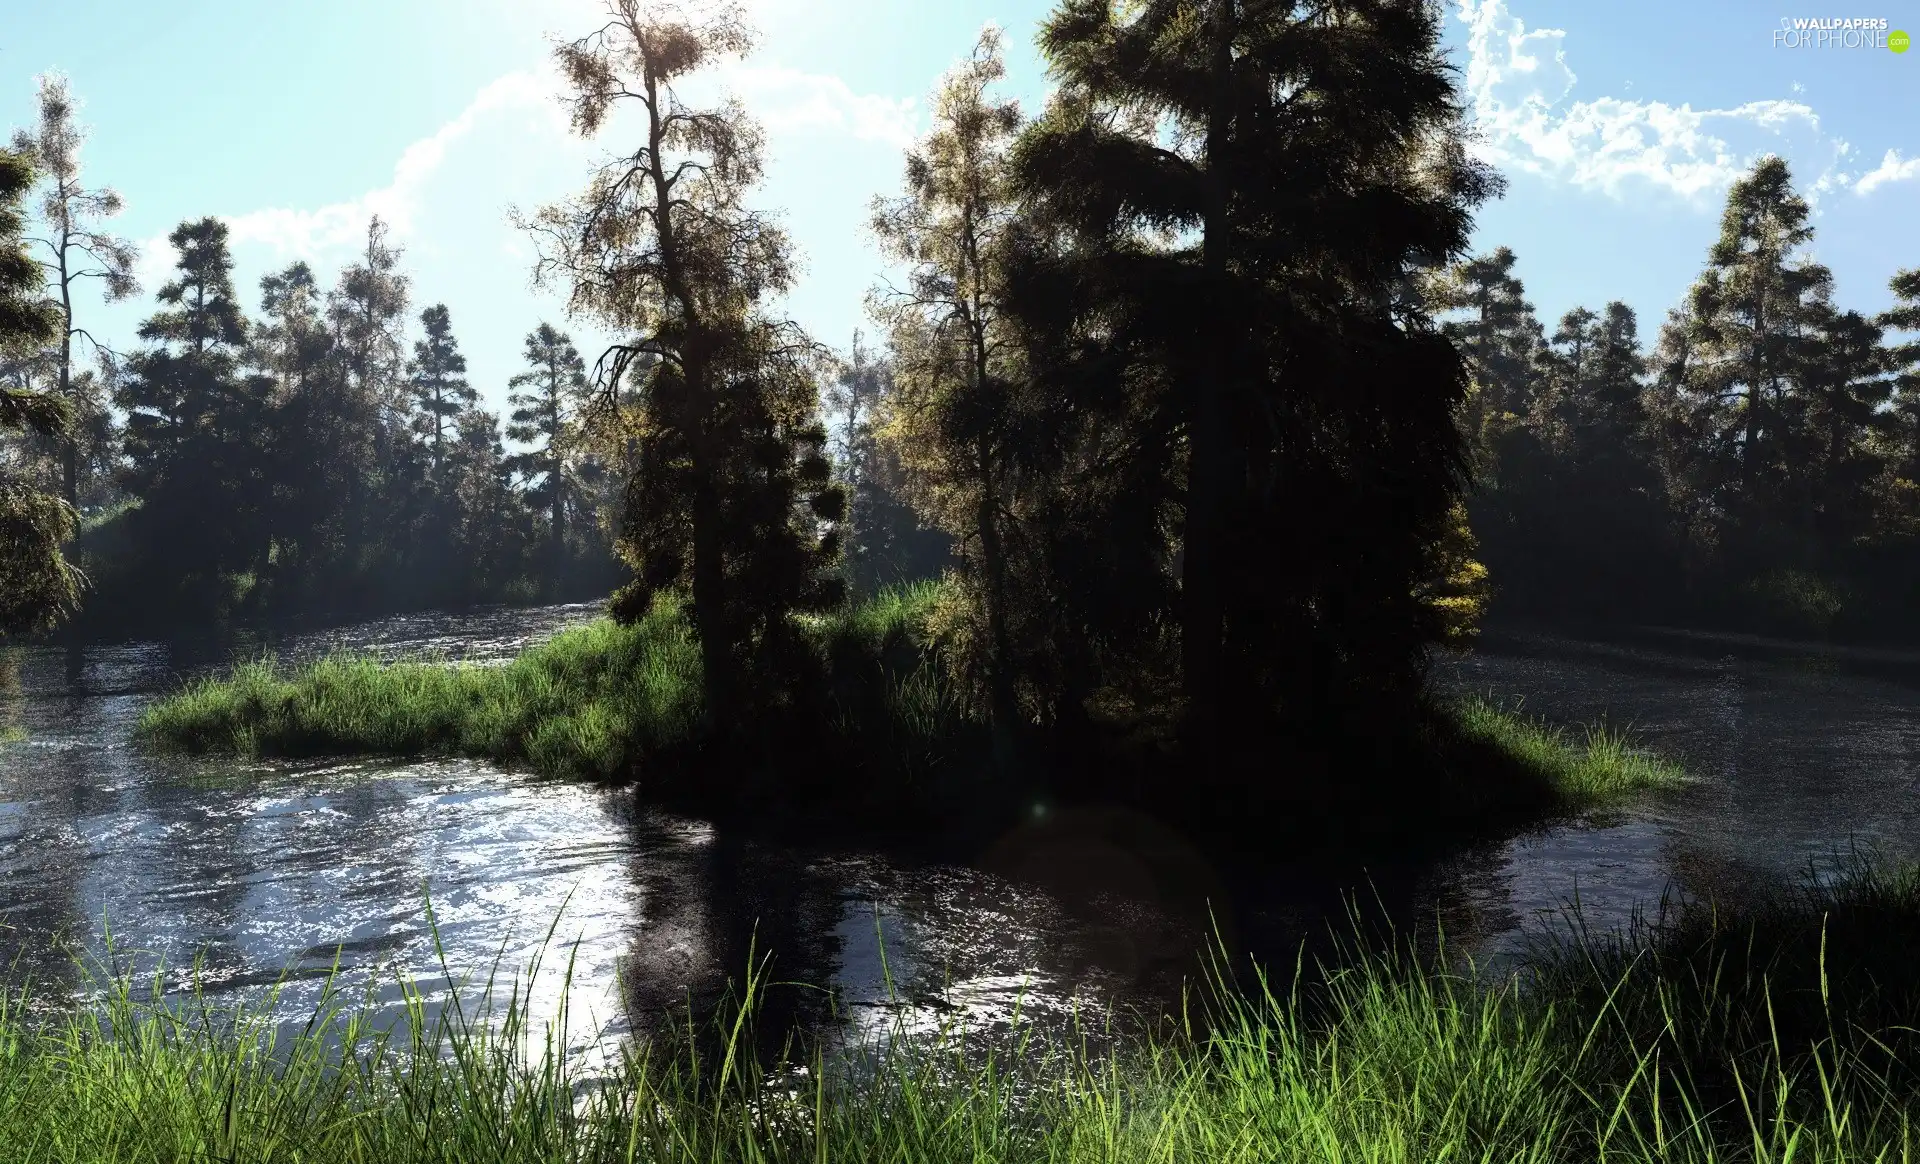 viewes, Islet, grass, trees, River